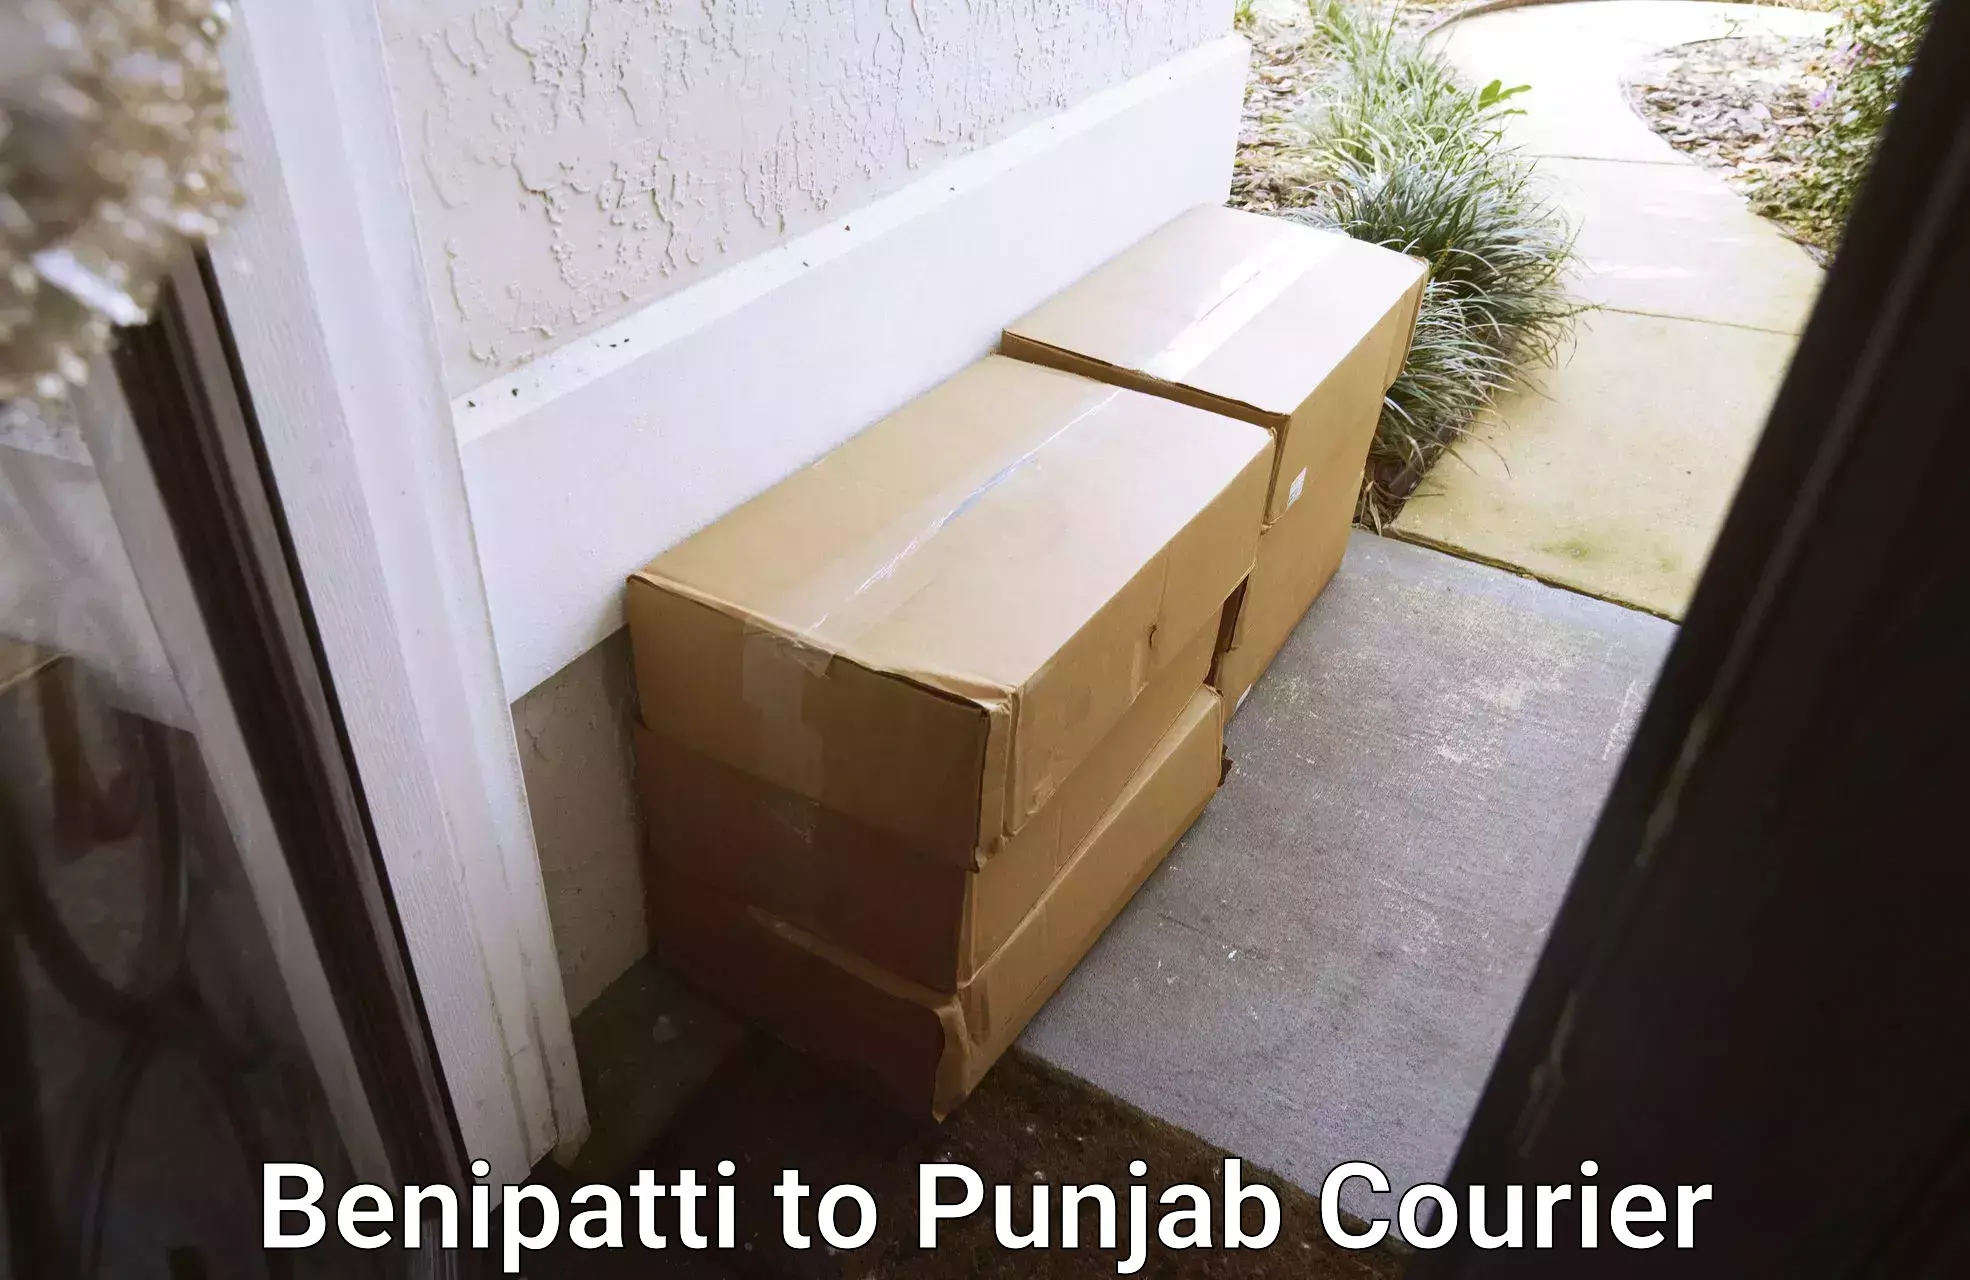 Home relocation experts Benipatti to Patiala